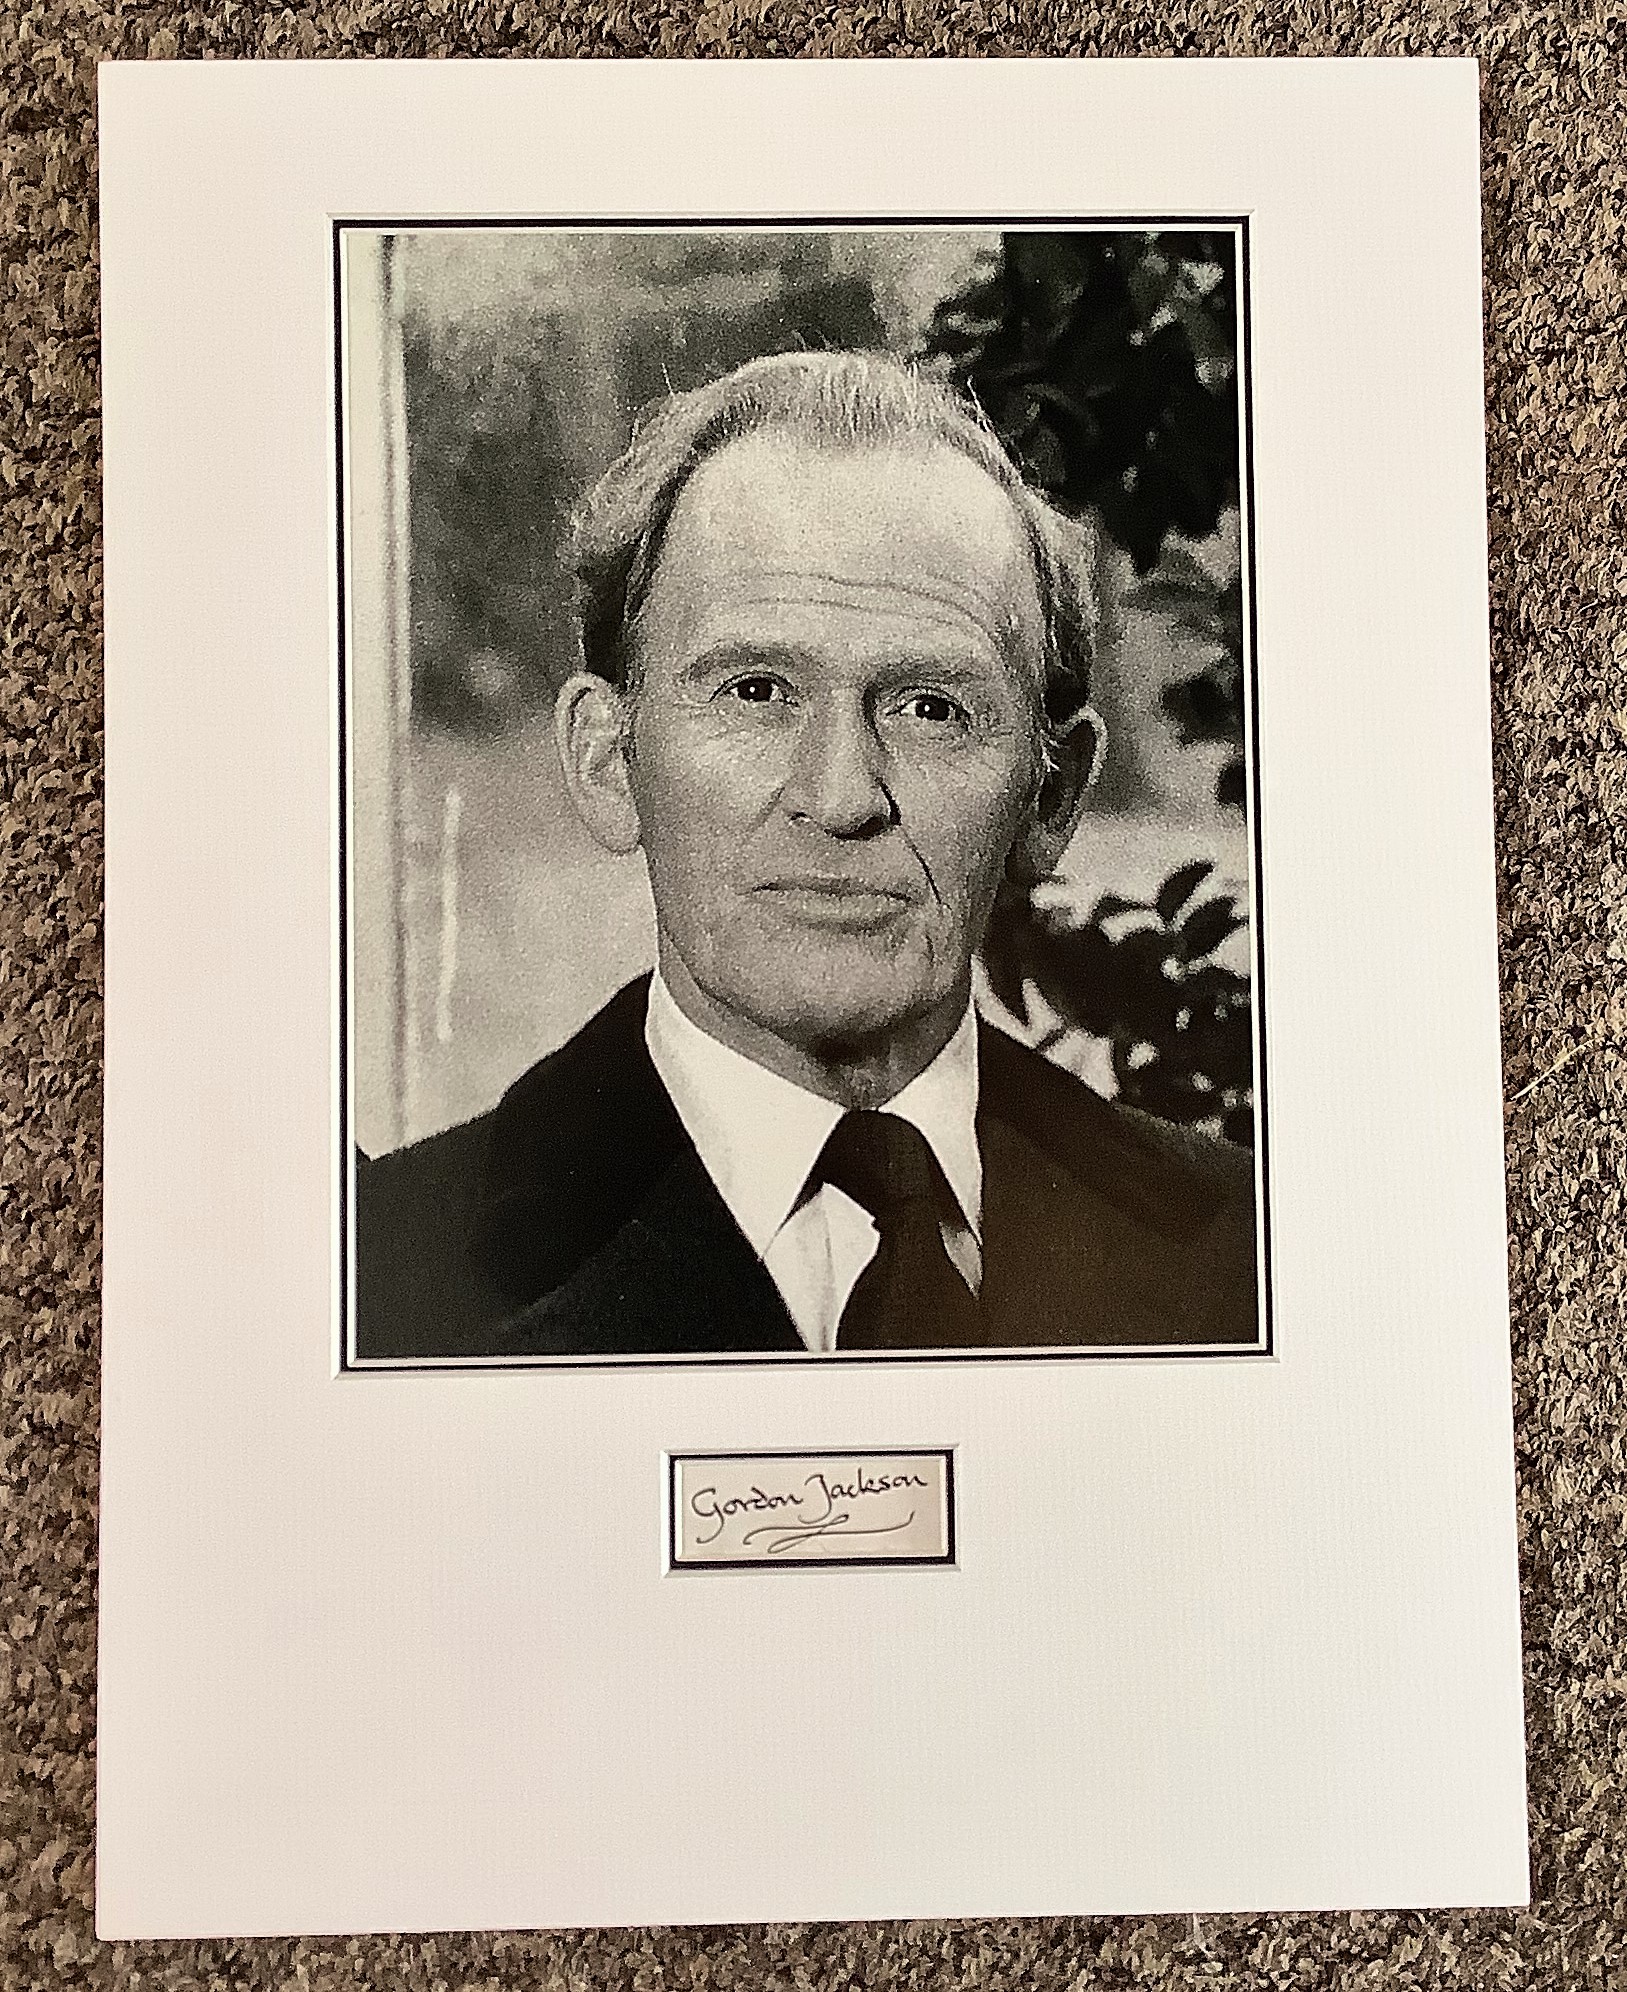 Gordon Jackson 16x12 approx mounted signature piece includes signed album page and a black and white